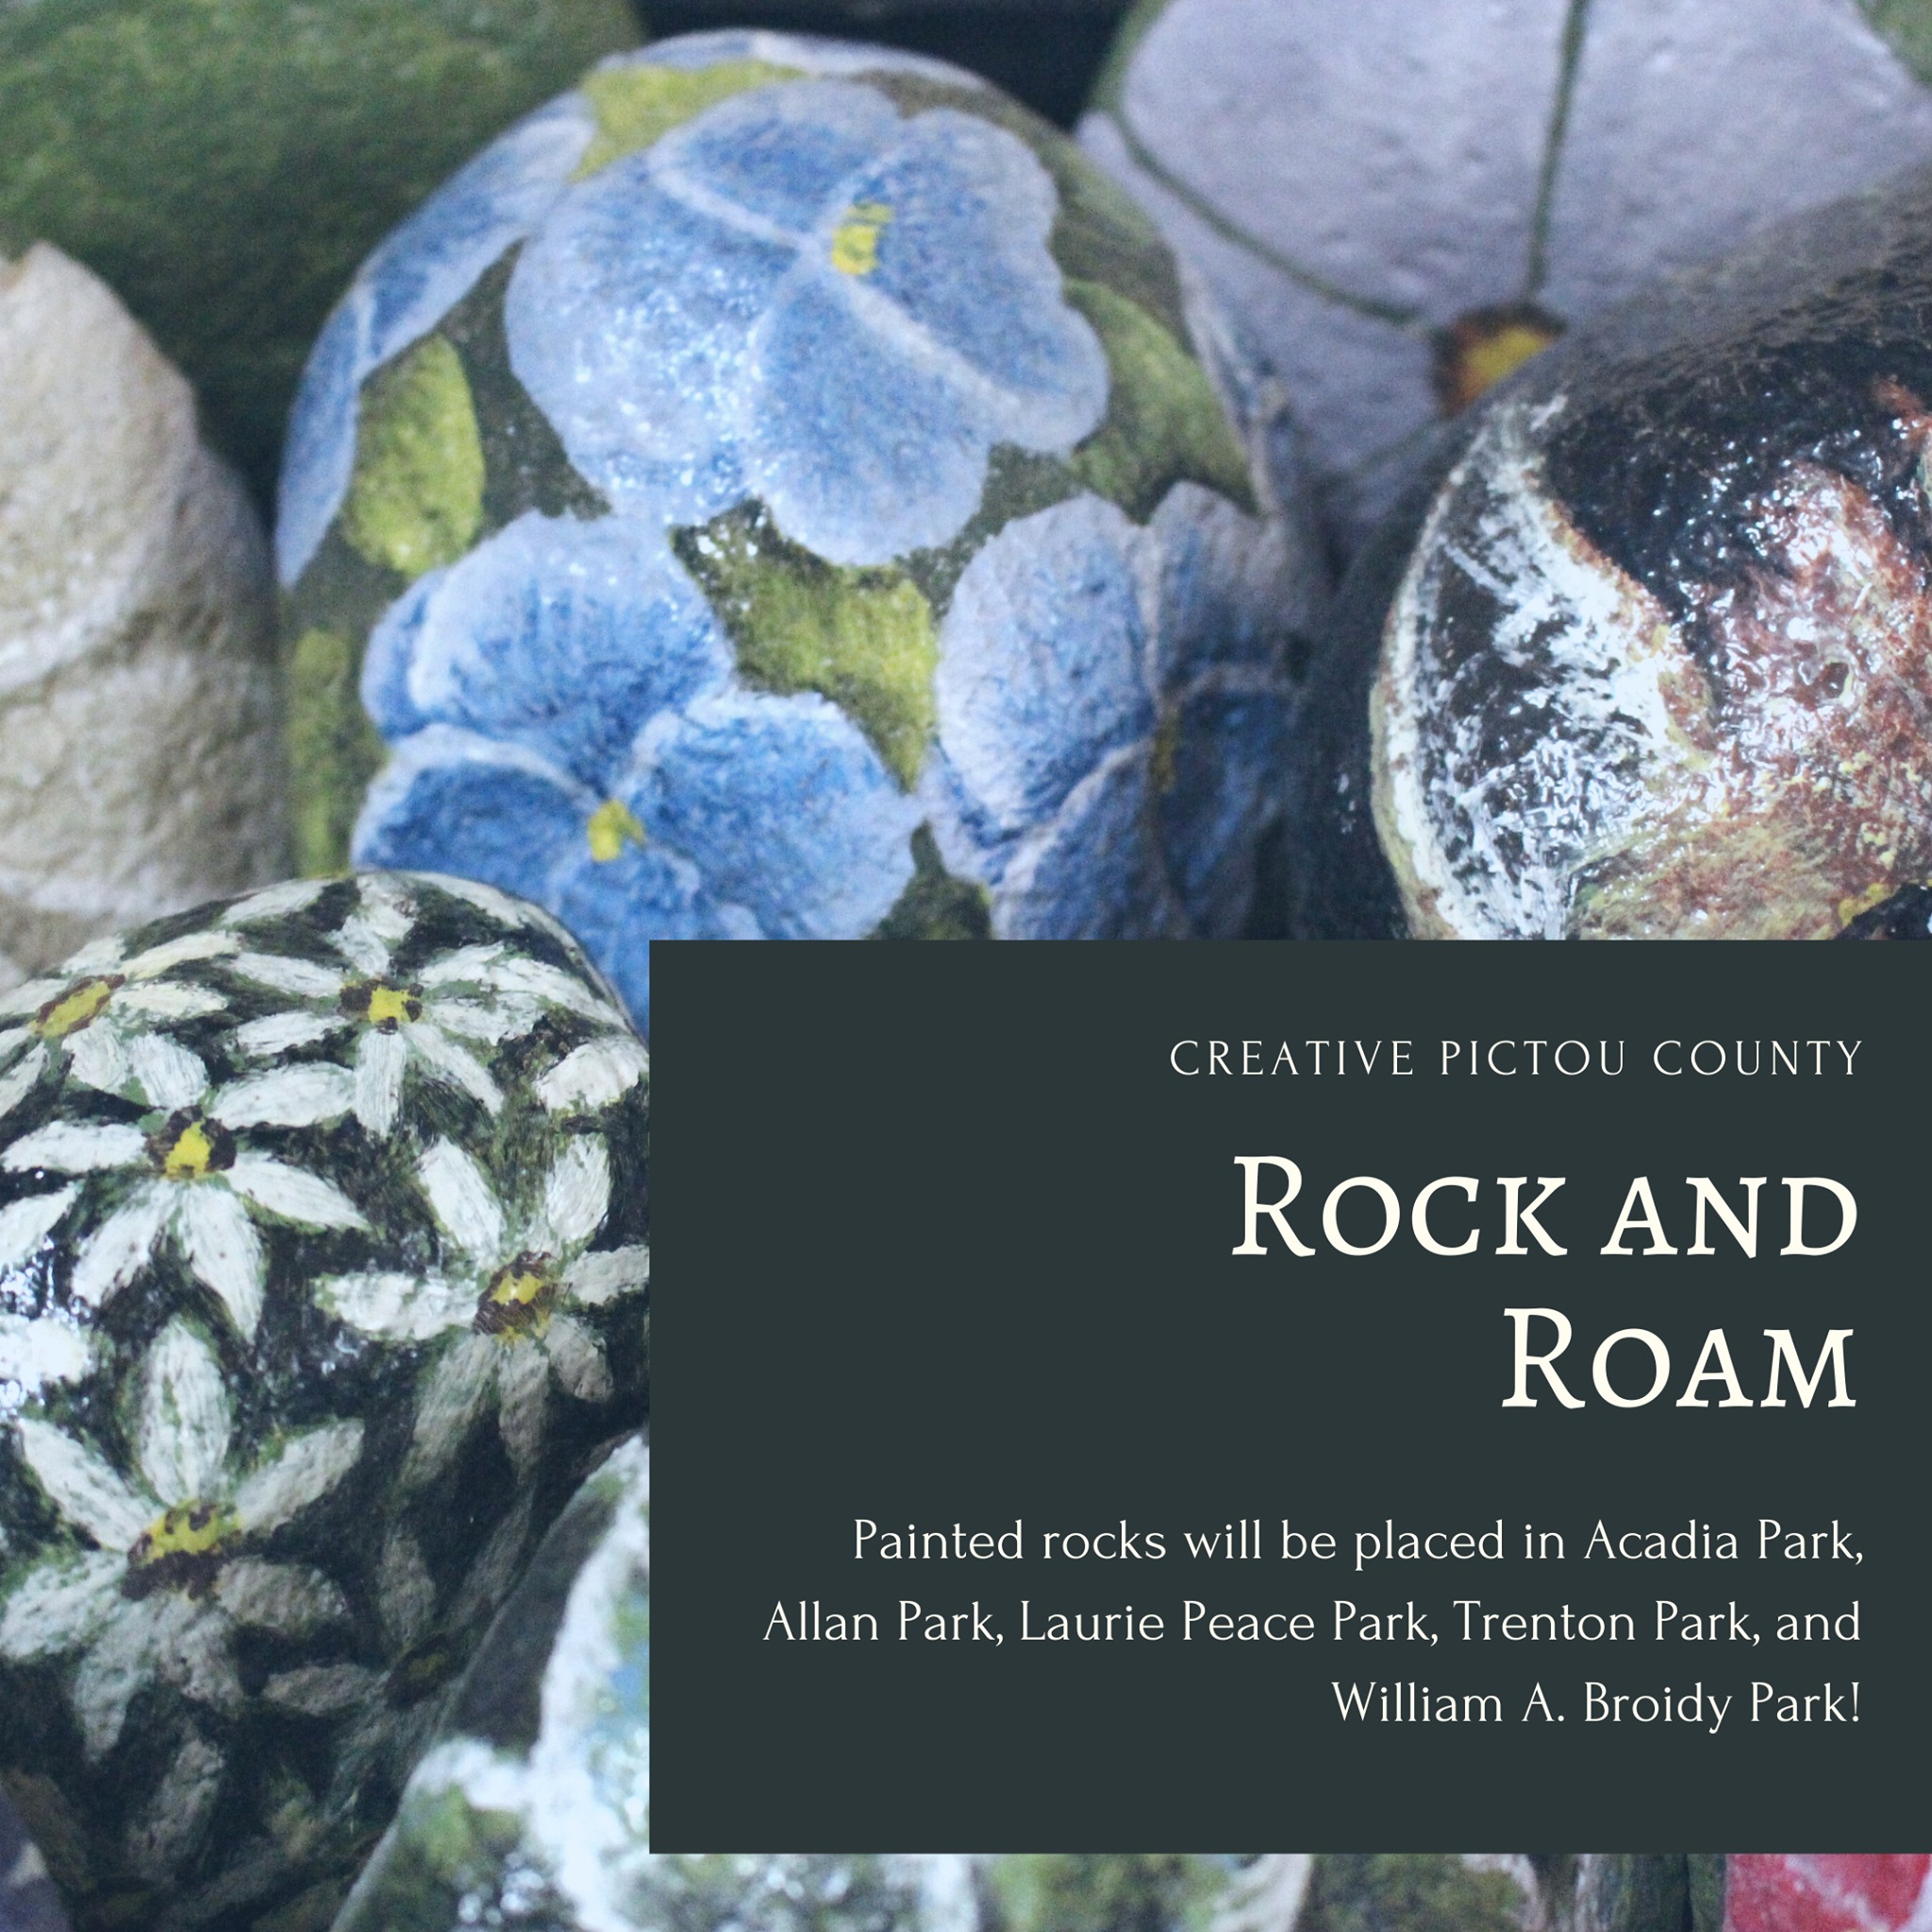 creative pictou county artist rock and roam project